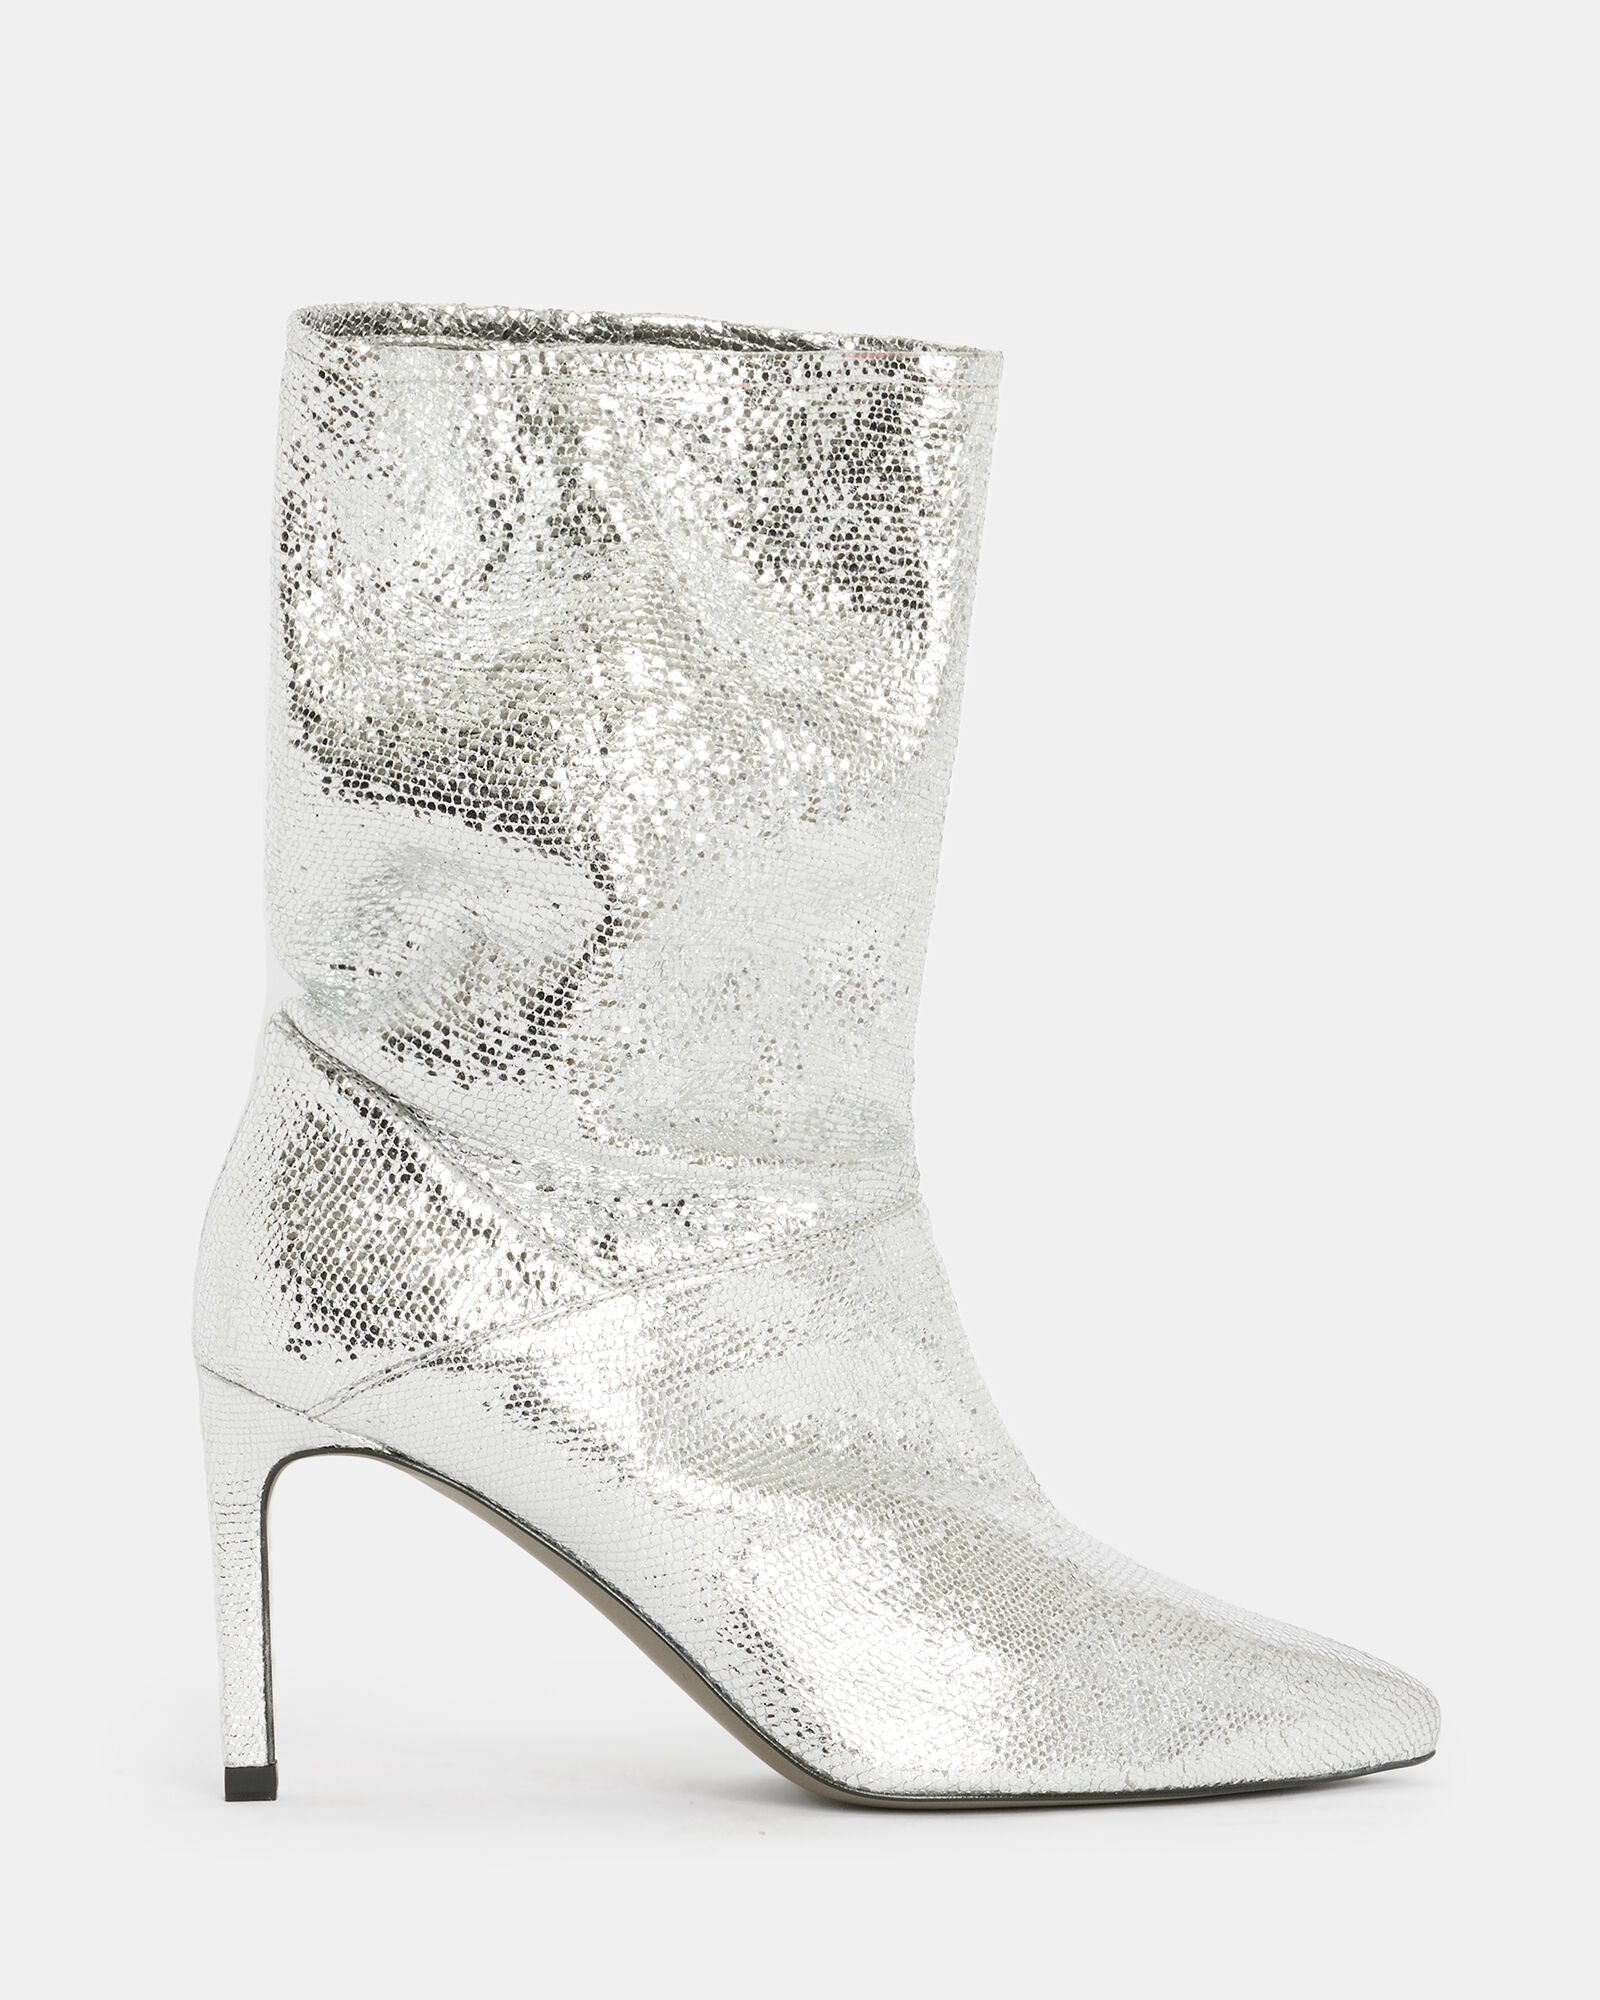 Orlana Heeled Shimmer Leather Boots Metallic Silver | ALLSAINTS US